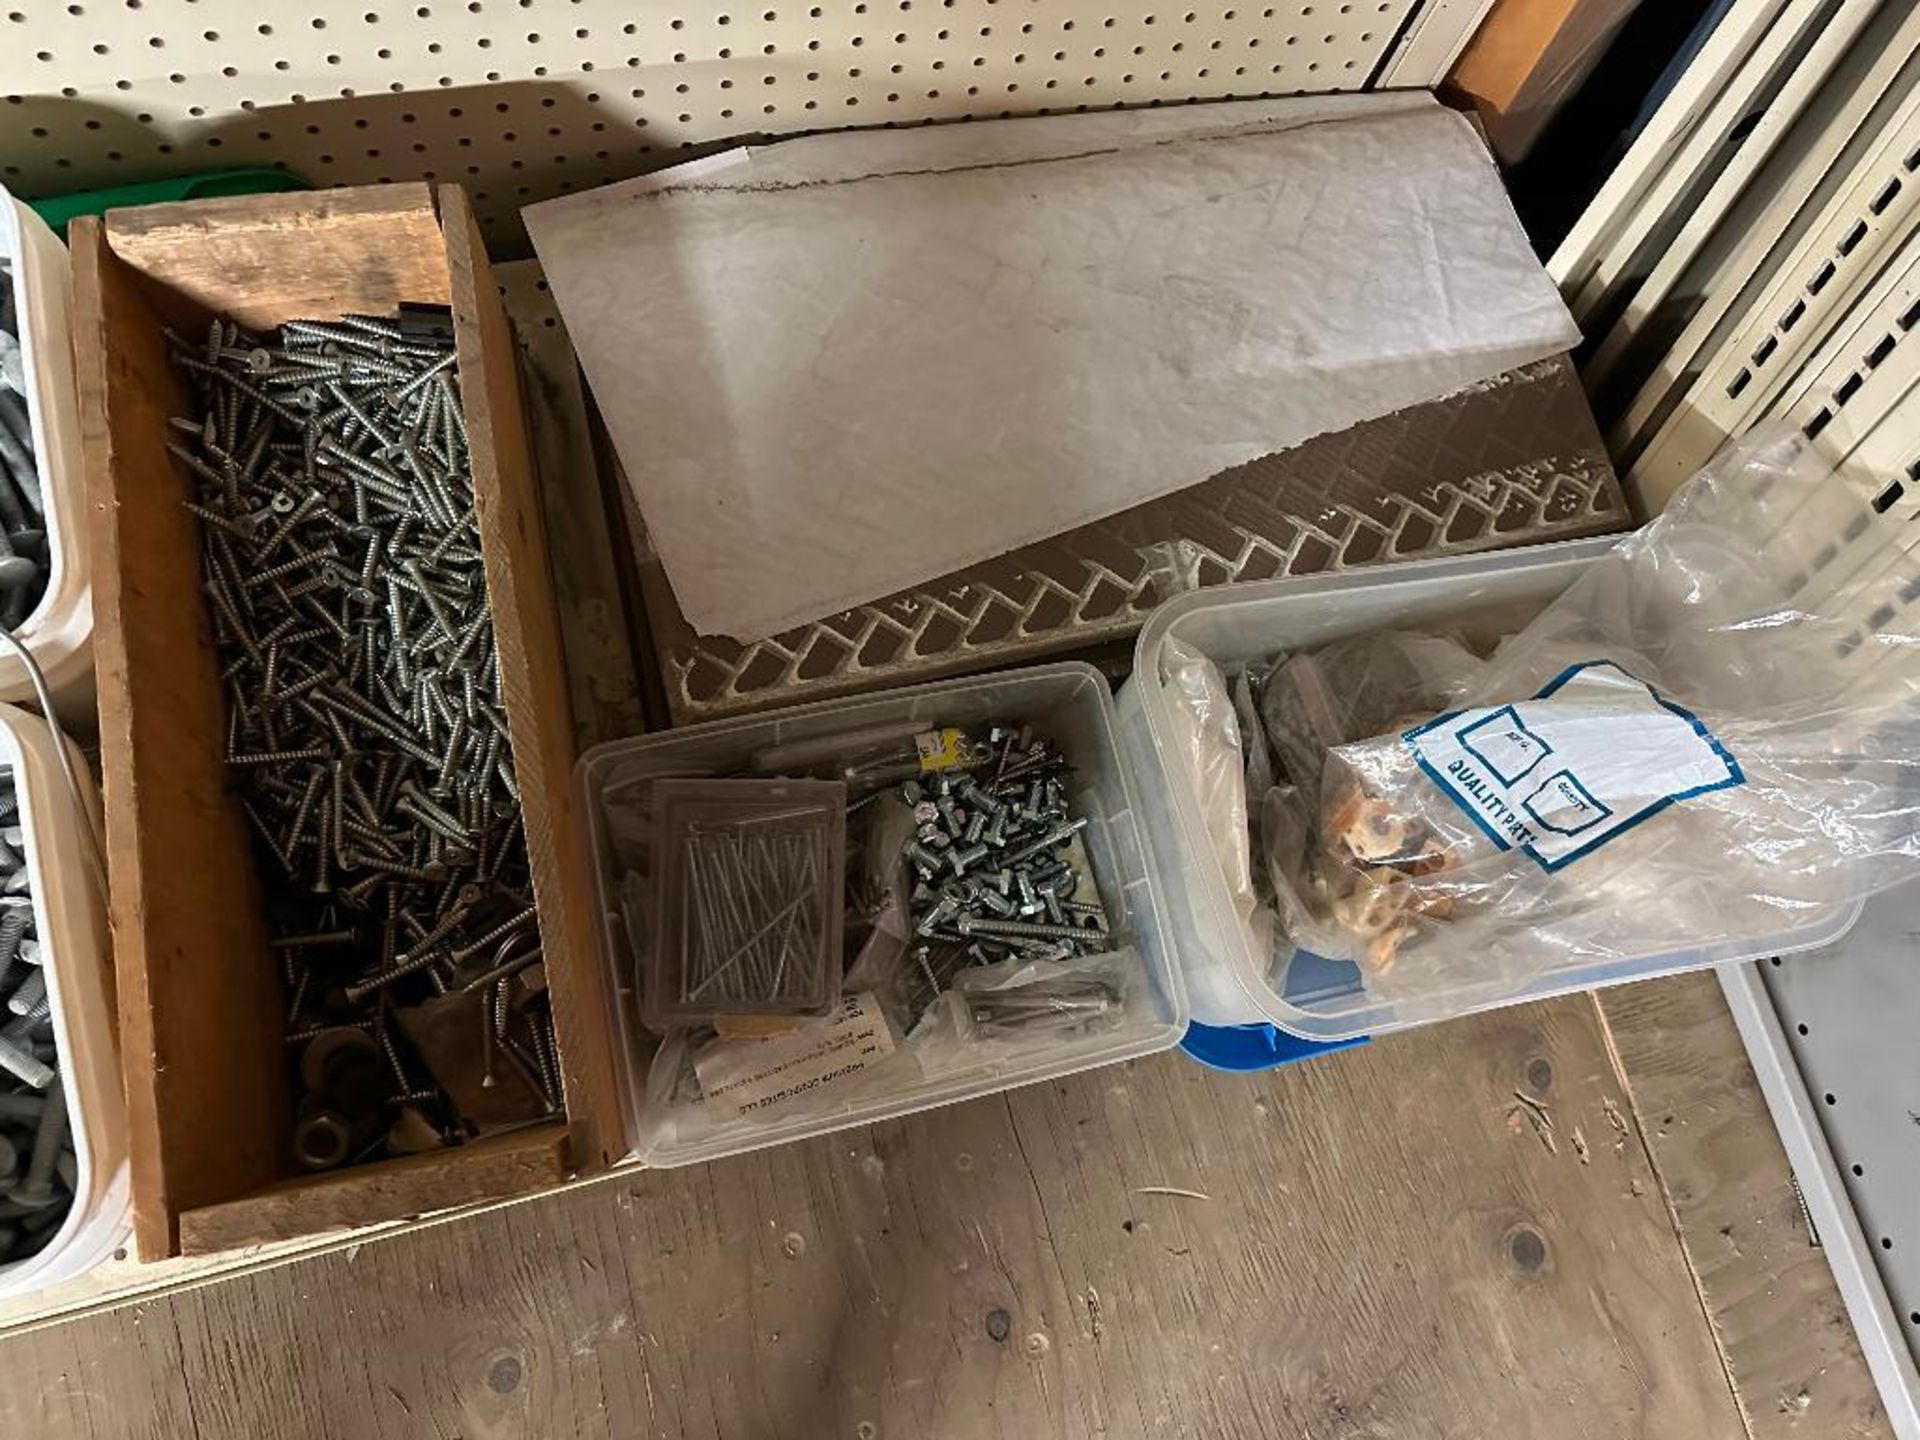 Lot of Asst. Fasteners including Screws, Nuts, Bolts, Nails, etc. - Image 5 of 5